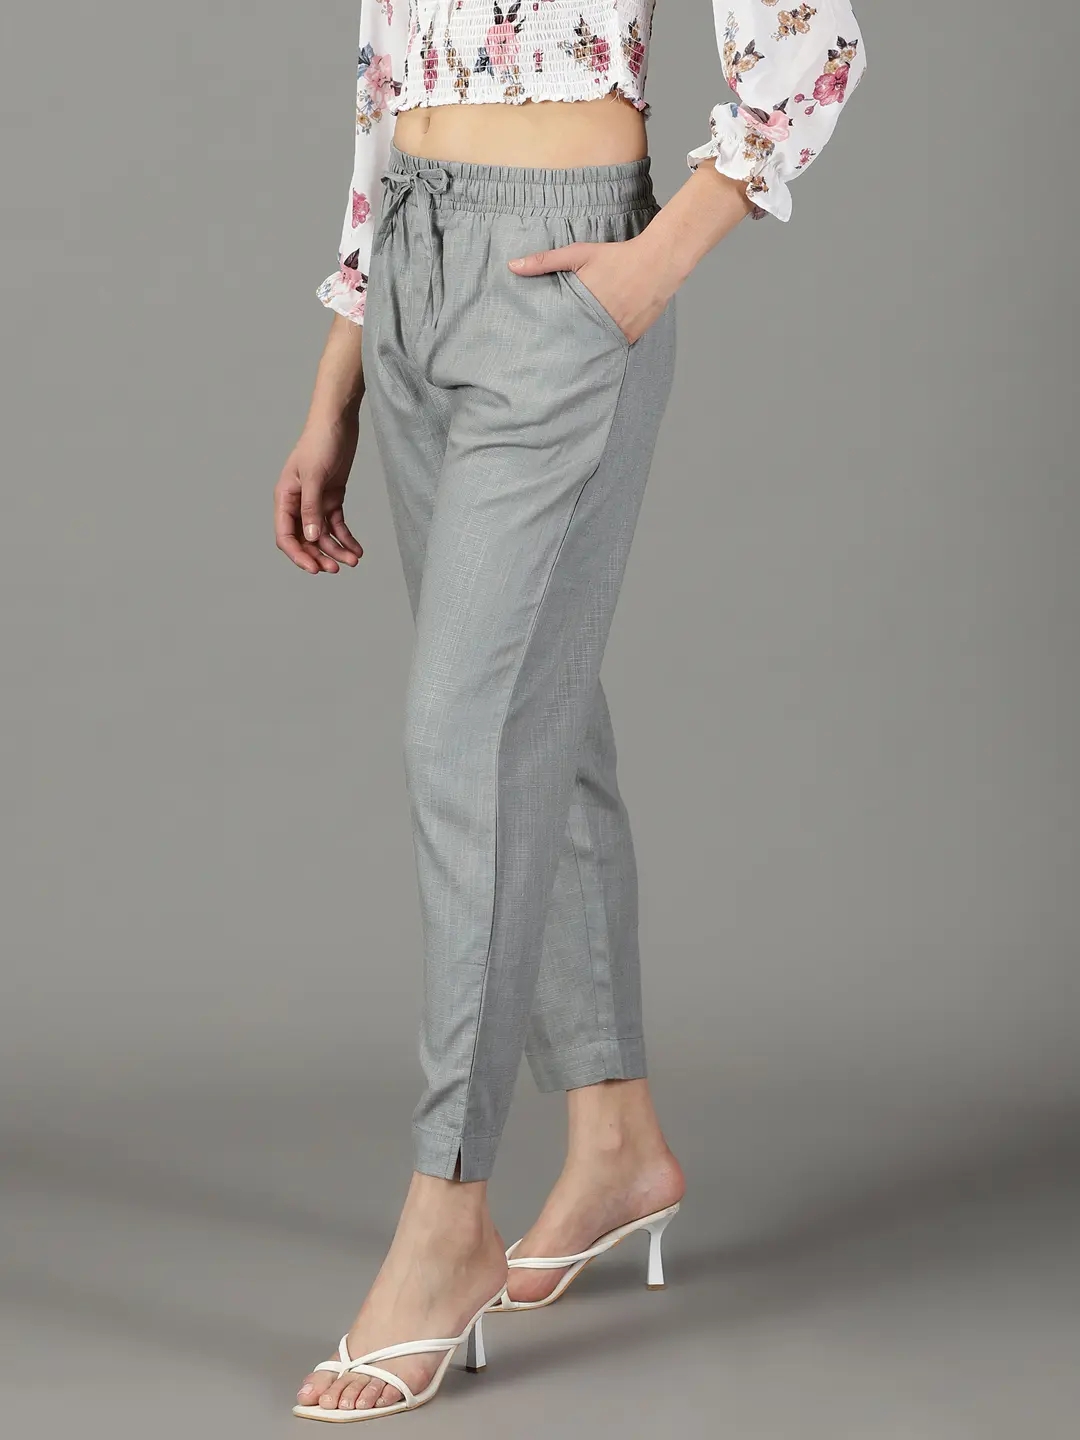 SHOWOFF Trousers and Pants  Buy SHOWOFF Womens Highrise Grey Solid Slim  Fit Cigarette Trousers Set of 2 Online  Nykaa Fashion